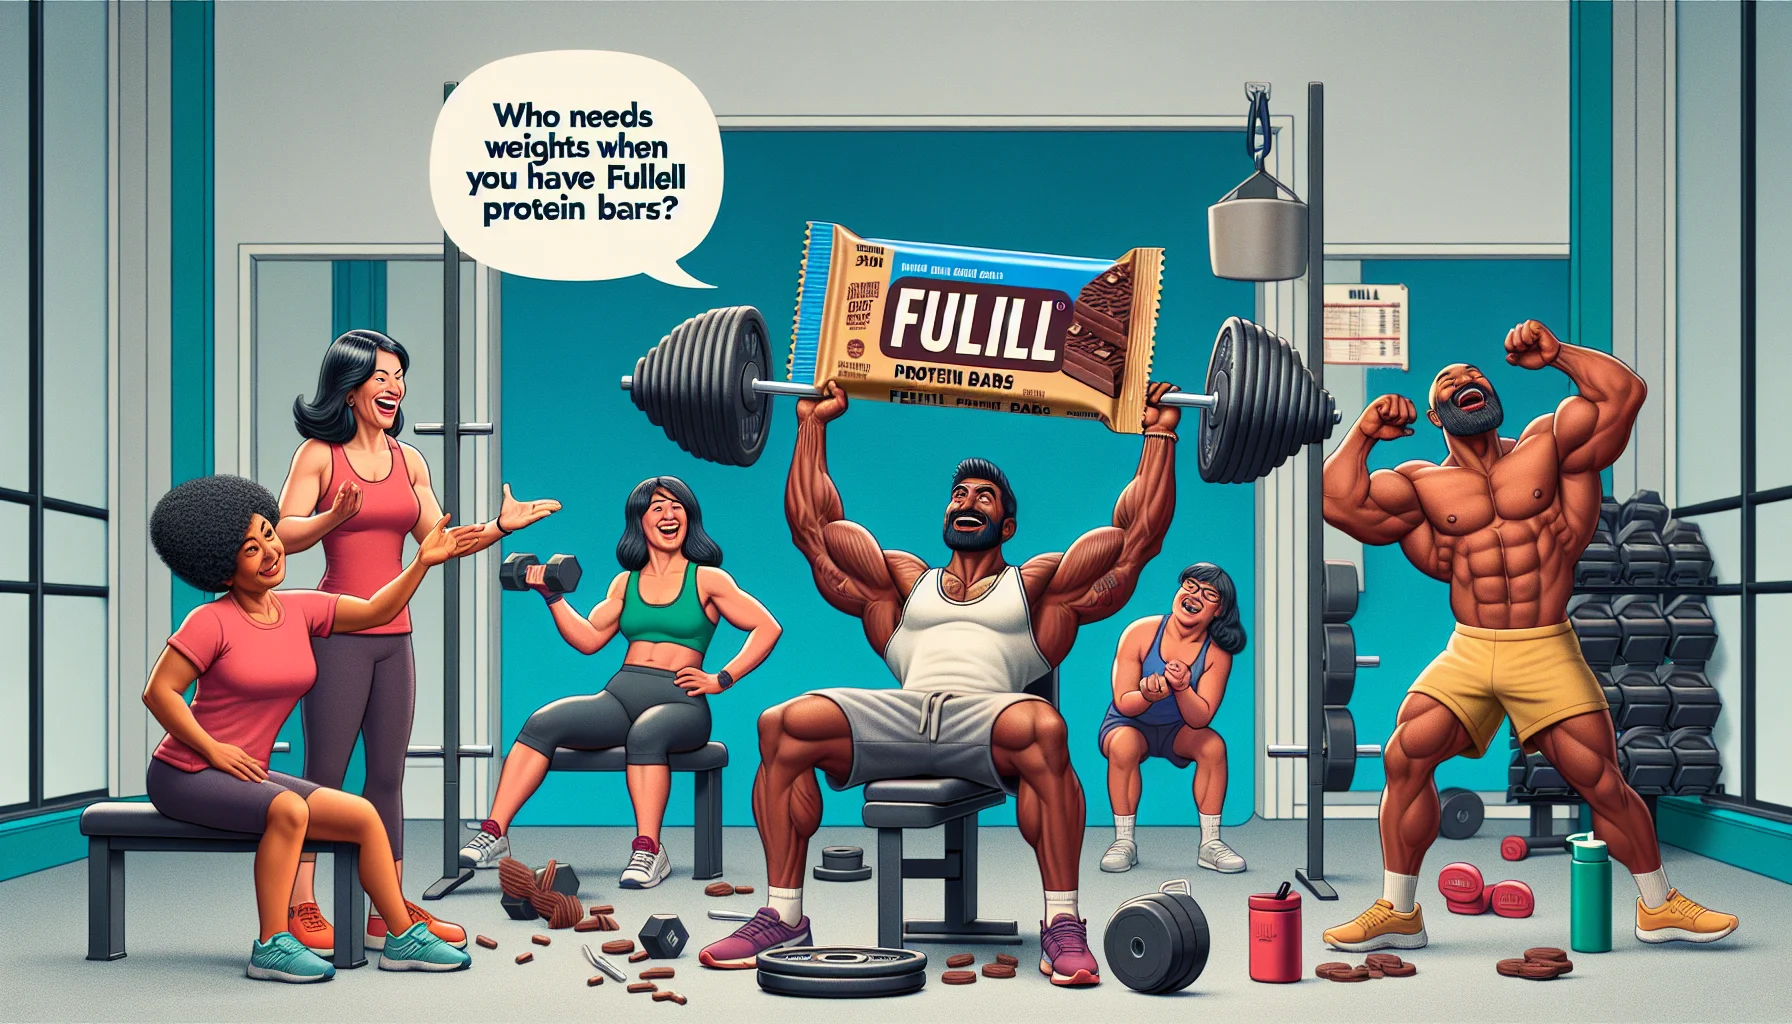 Create a humorous scene centered around Fulfill branded protein bars. Imagine a gym setting, where a multiracial group of people, both male and female, are working out. One person, a South Asian woman, has lifted an exceptionally heavy weight up high and upon it lies a protein bar, causing a pause in her routine and causing everyone around her to have a good hearty laugh. An African American man, quite muscular and fit, trades his dumbbell for the protein bar, adding to the giggles. On the side, a text bubbles read, 'Who needs weights when you have Fulfill protein bars?'. The scenario overall should be fun, lively and promote the use of protein bars in sports and exercise.